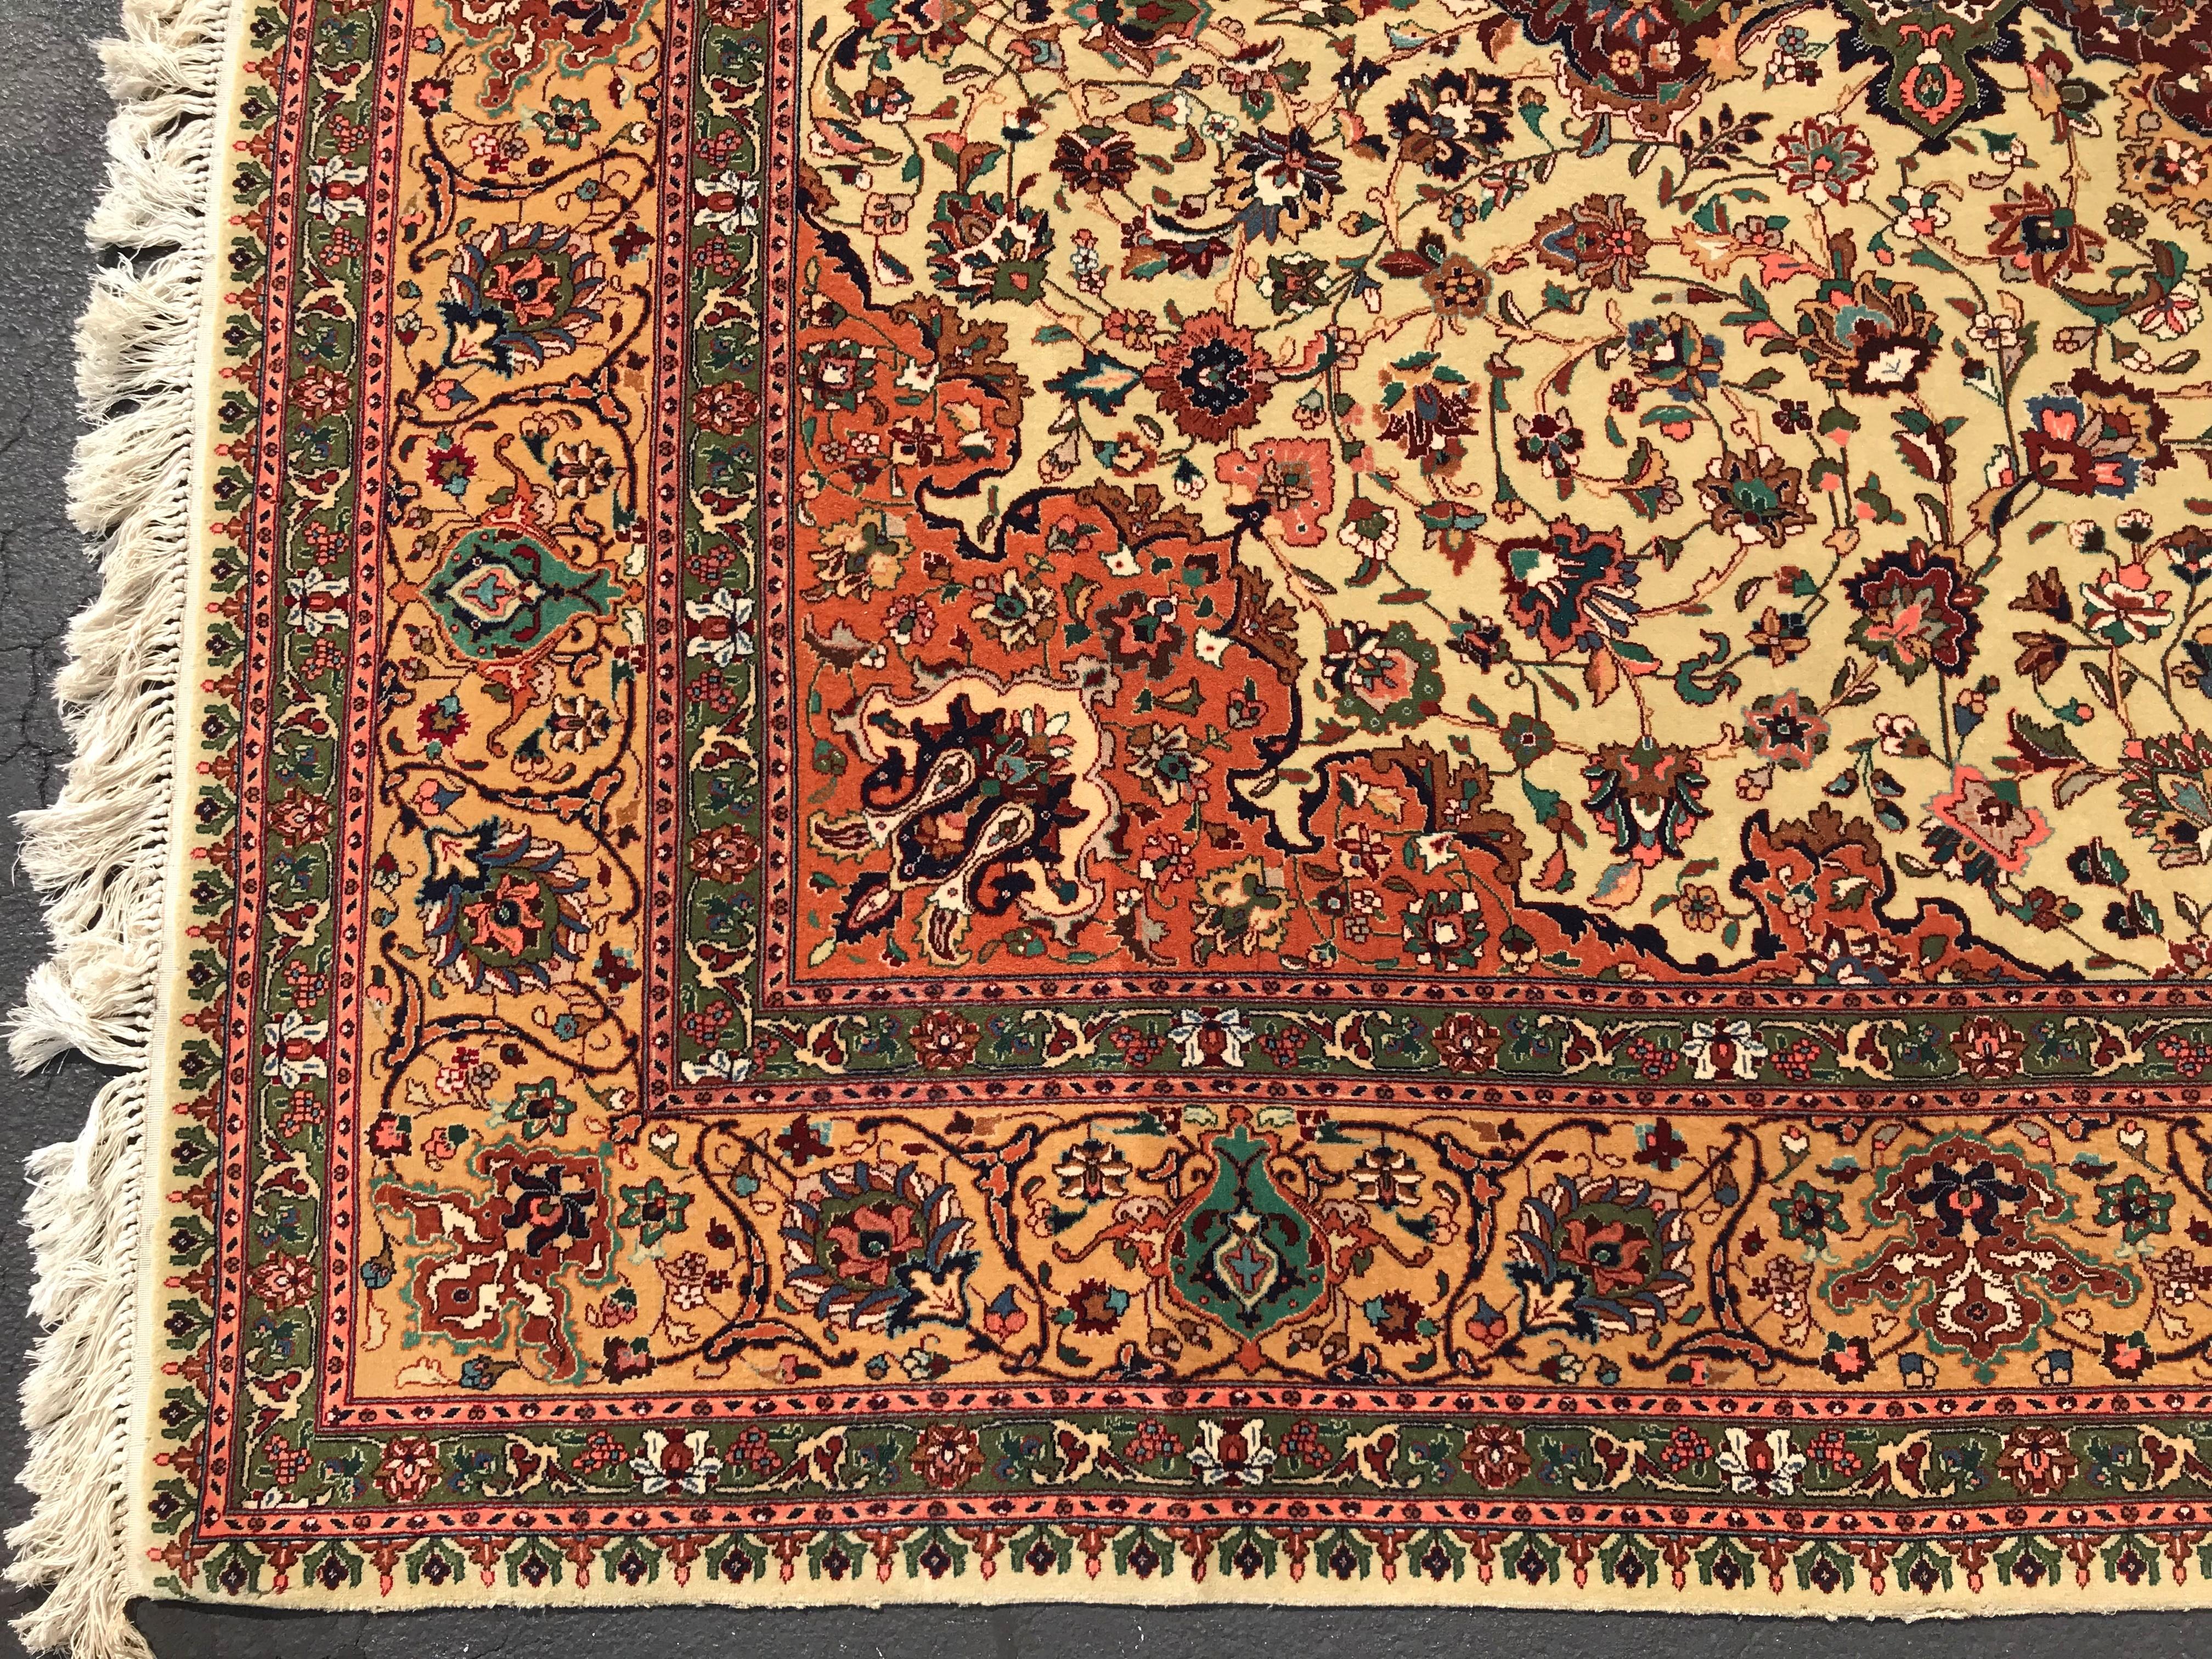 A fine Tabriz handwoven wool rug with central medallion on a cream field and gold border, circa 1960. Very good overall condition, tightly woven and made with vegetable dyes, with minimal imperfections and light overall wear from age and use.